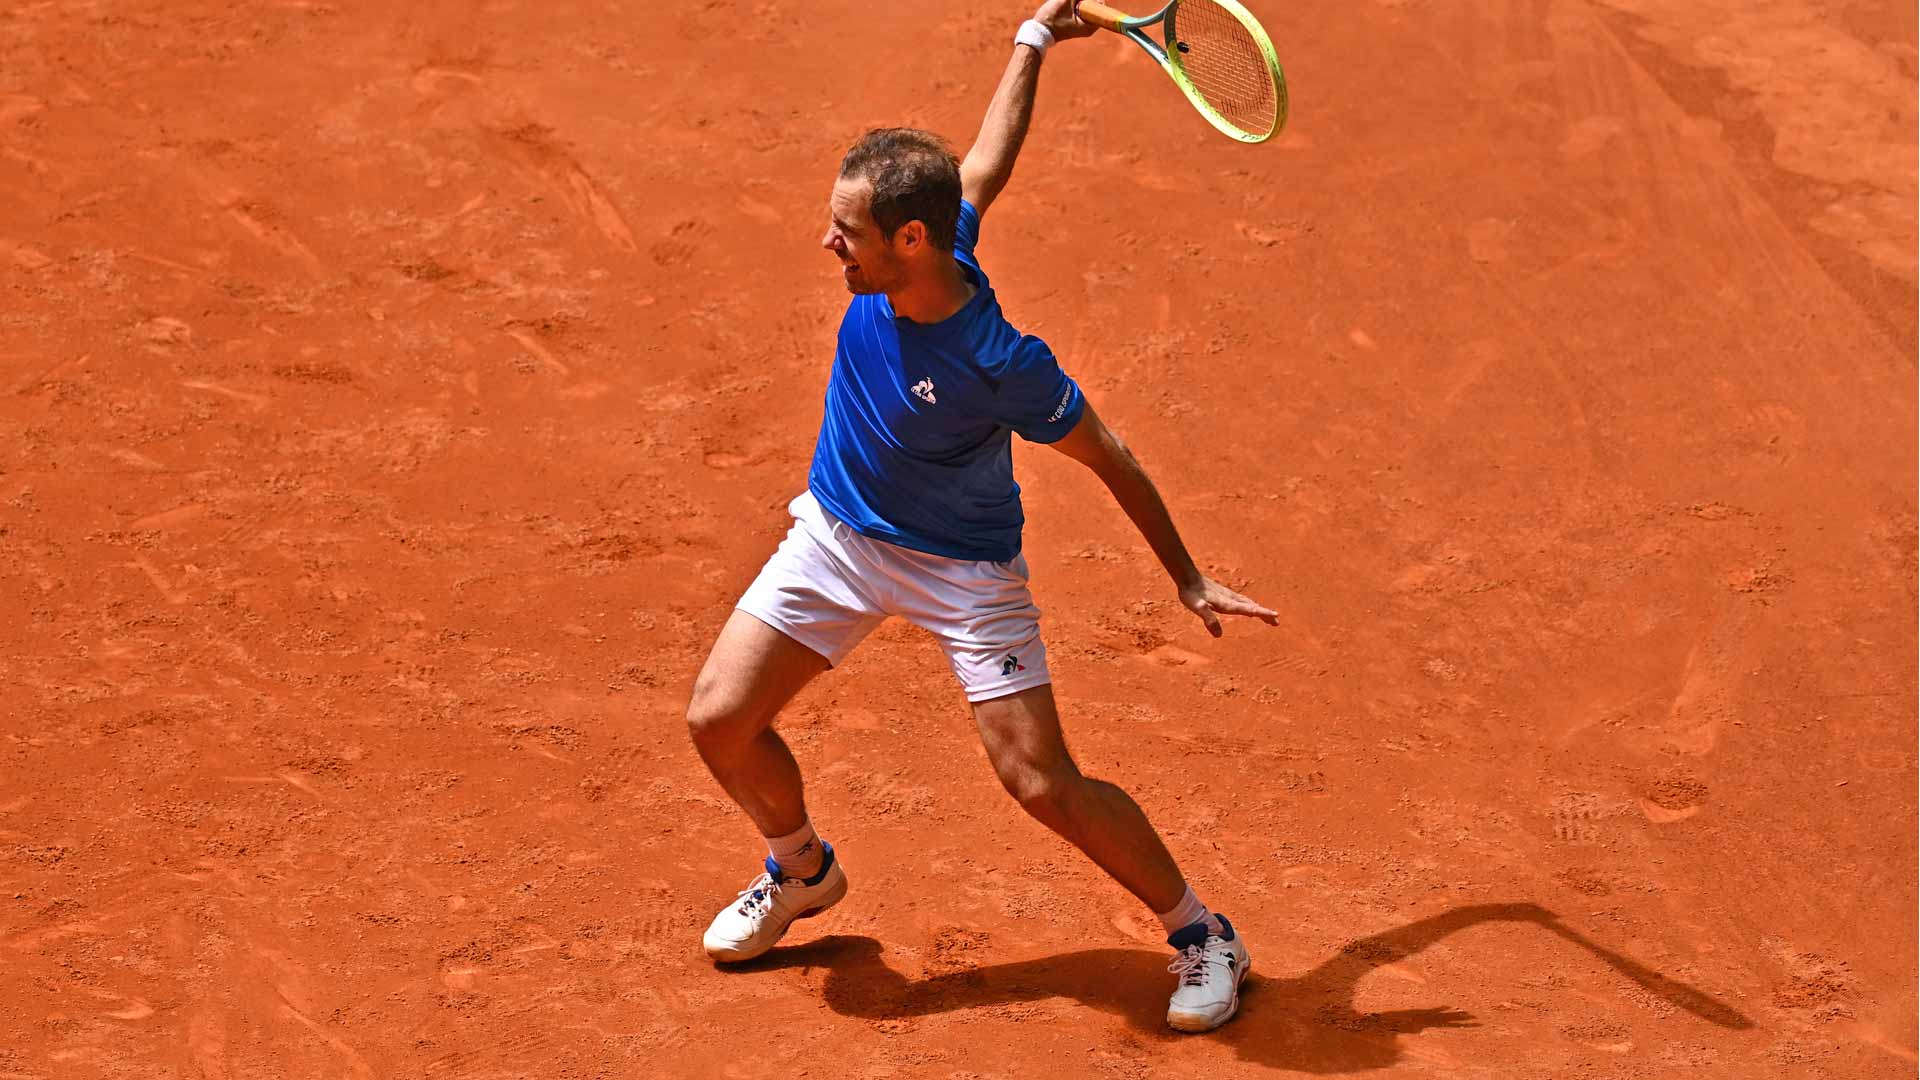 Richard Gasquet is set to play Roland Garros for the 21st time.